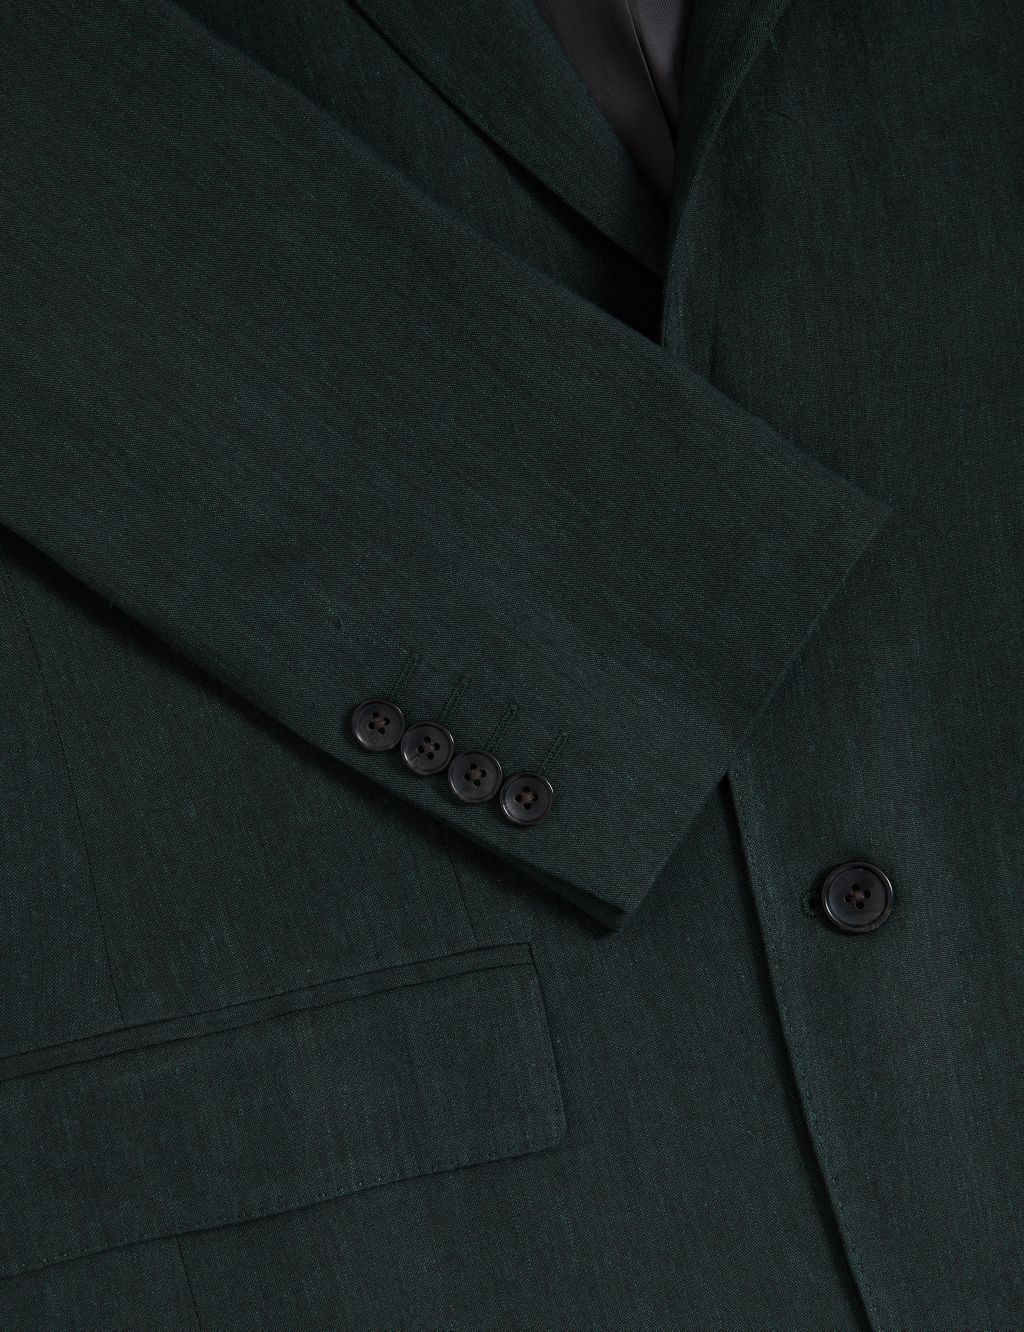 Tailored Fit Italian Linen Miracle™ Suit Jacket image 6